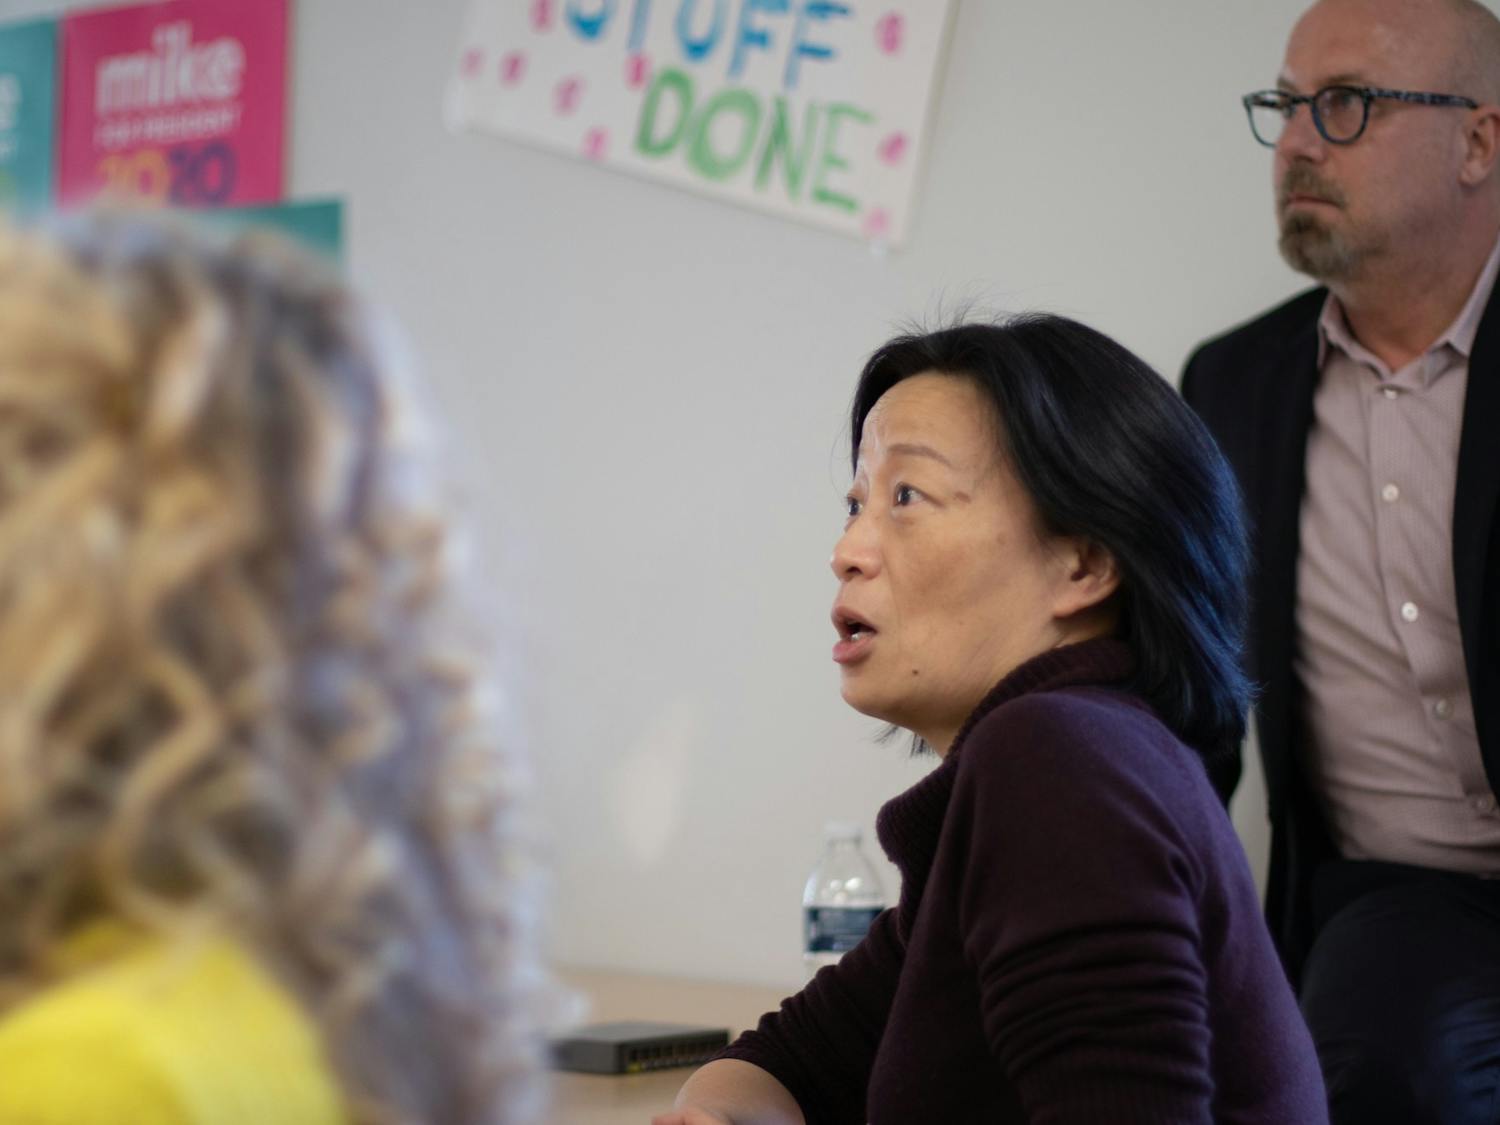 Chapel Hill council member Hongbin Gu asks a question of Tim O'Brien (not pictured) during a Bloomberg 2020 "strategy session" at the campaign's Chapel Hill office on Tuesday, Jan. 21, 2020.